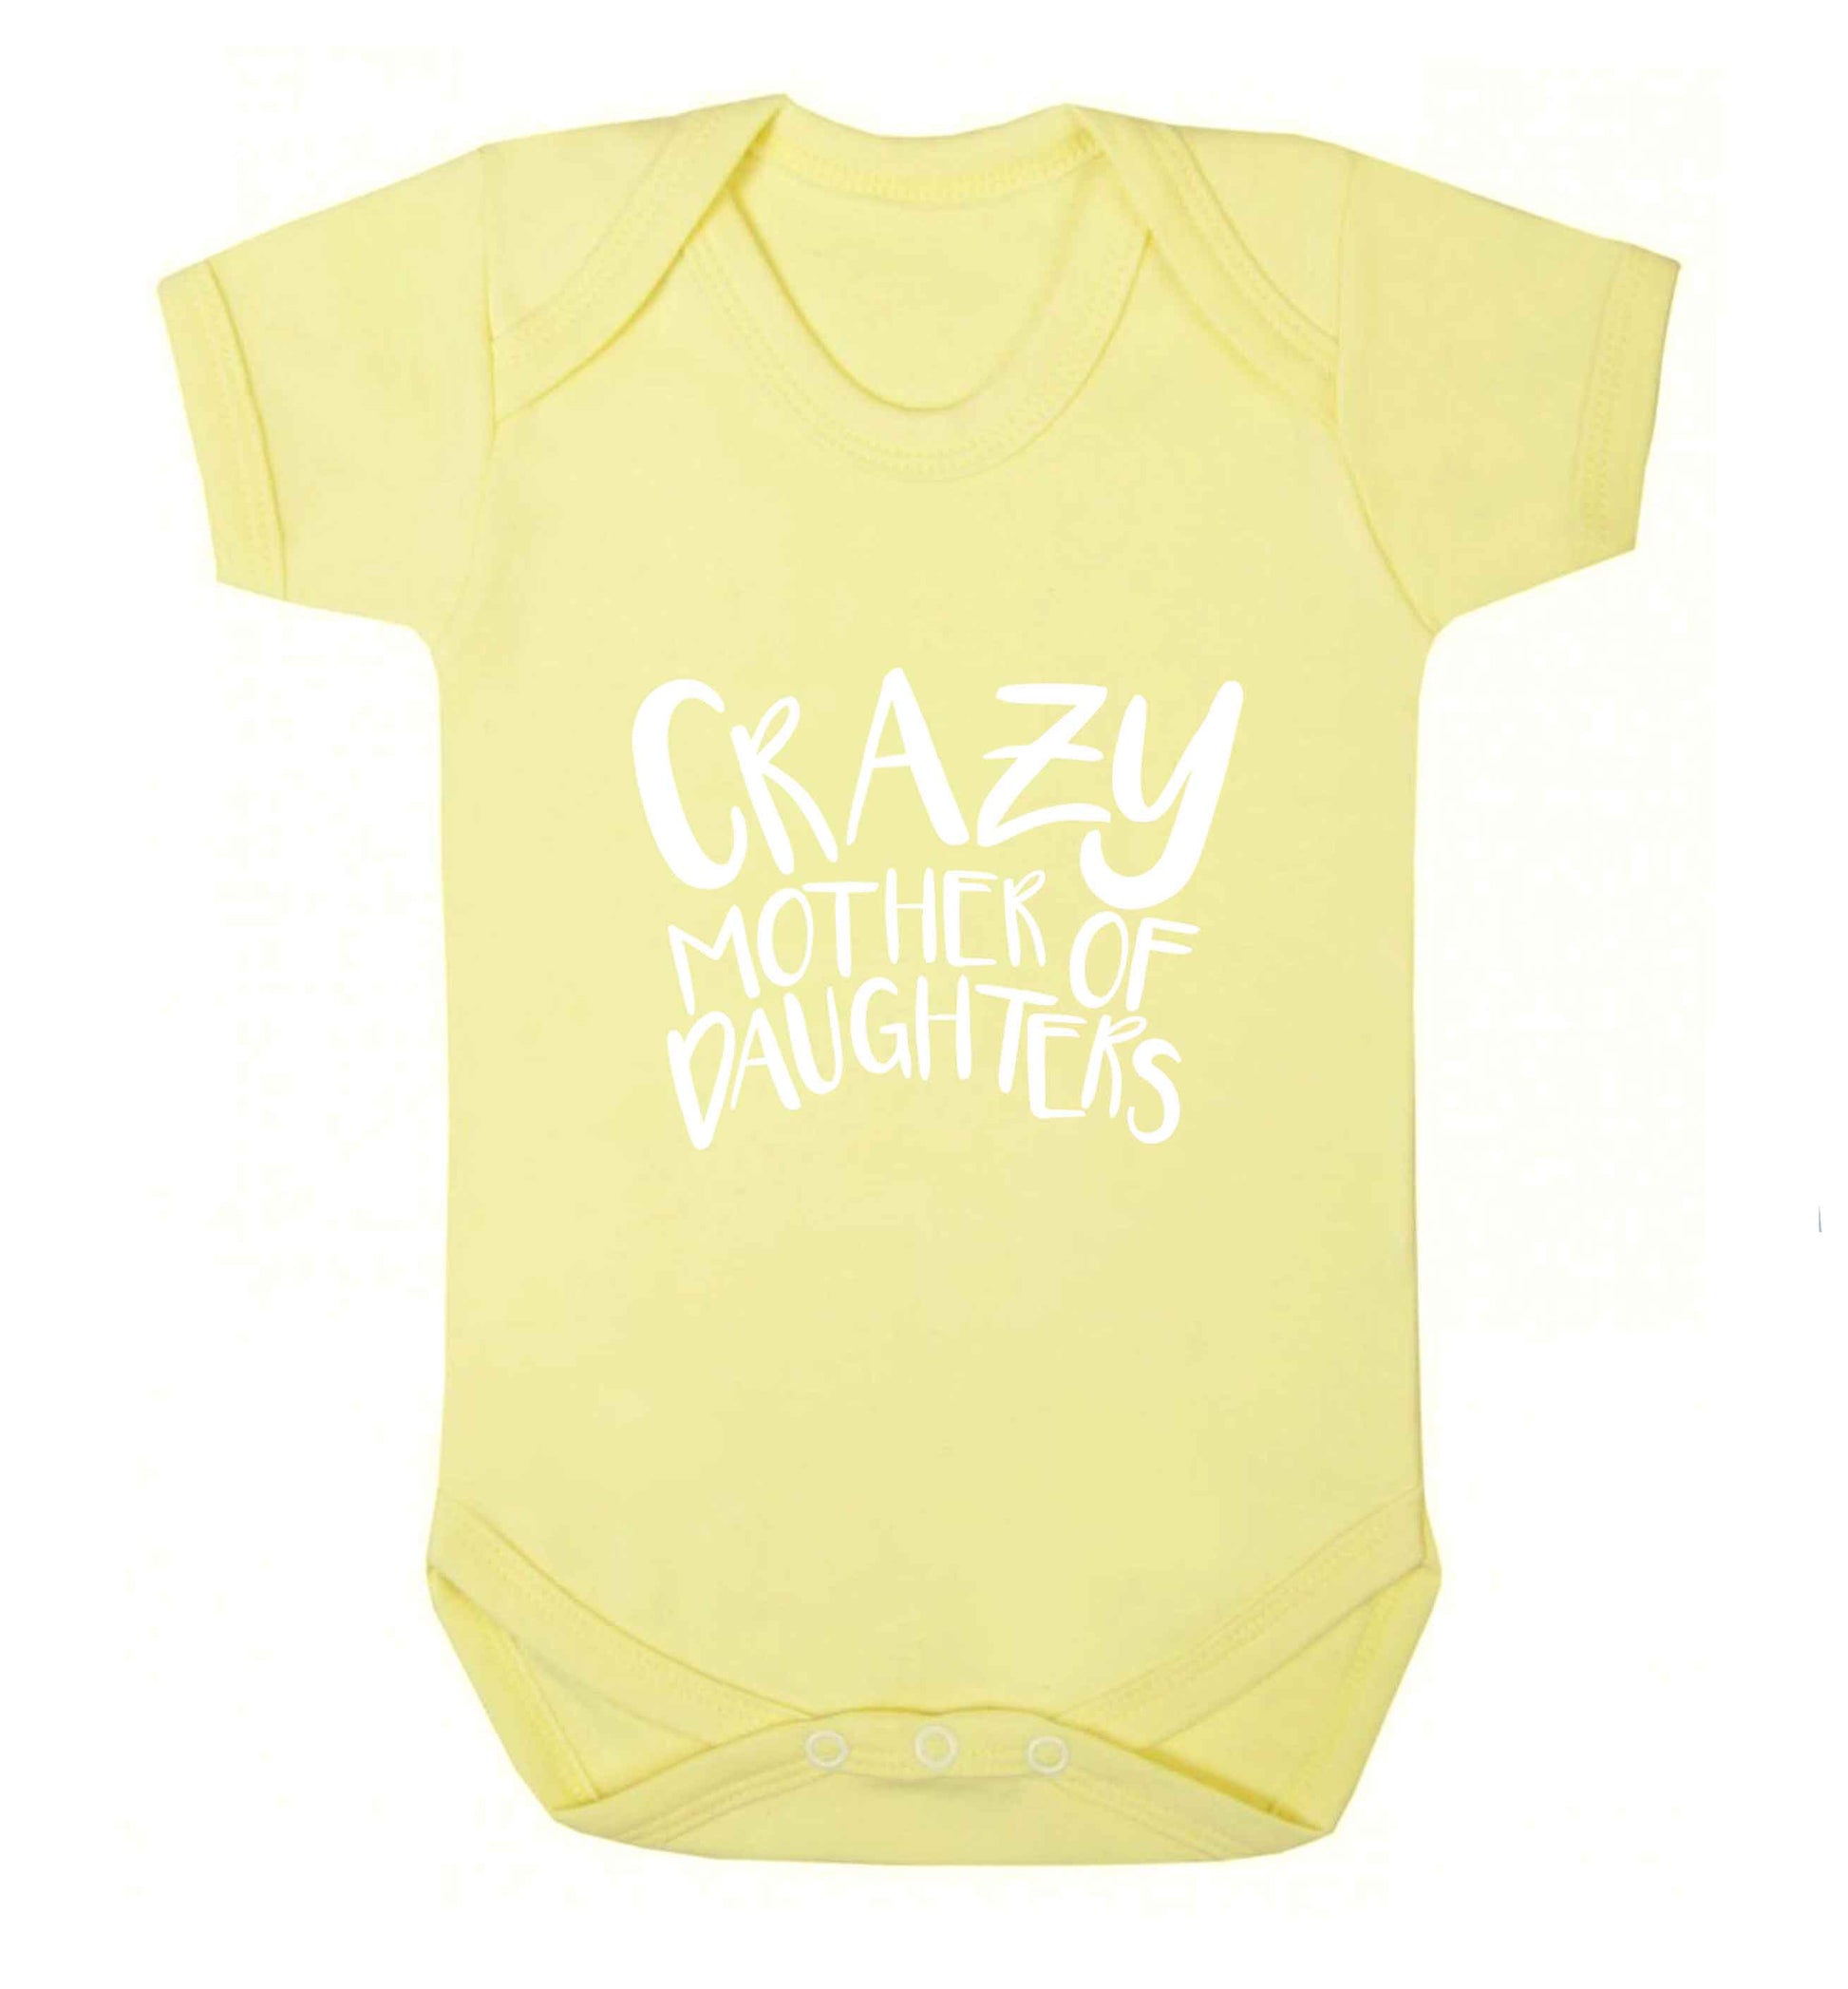 Crazy mother of daughters baby vest pale yellow 18-24 months